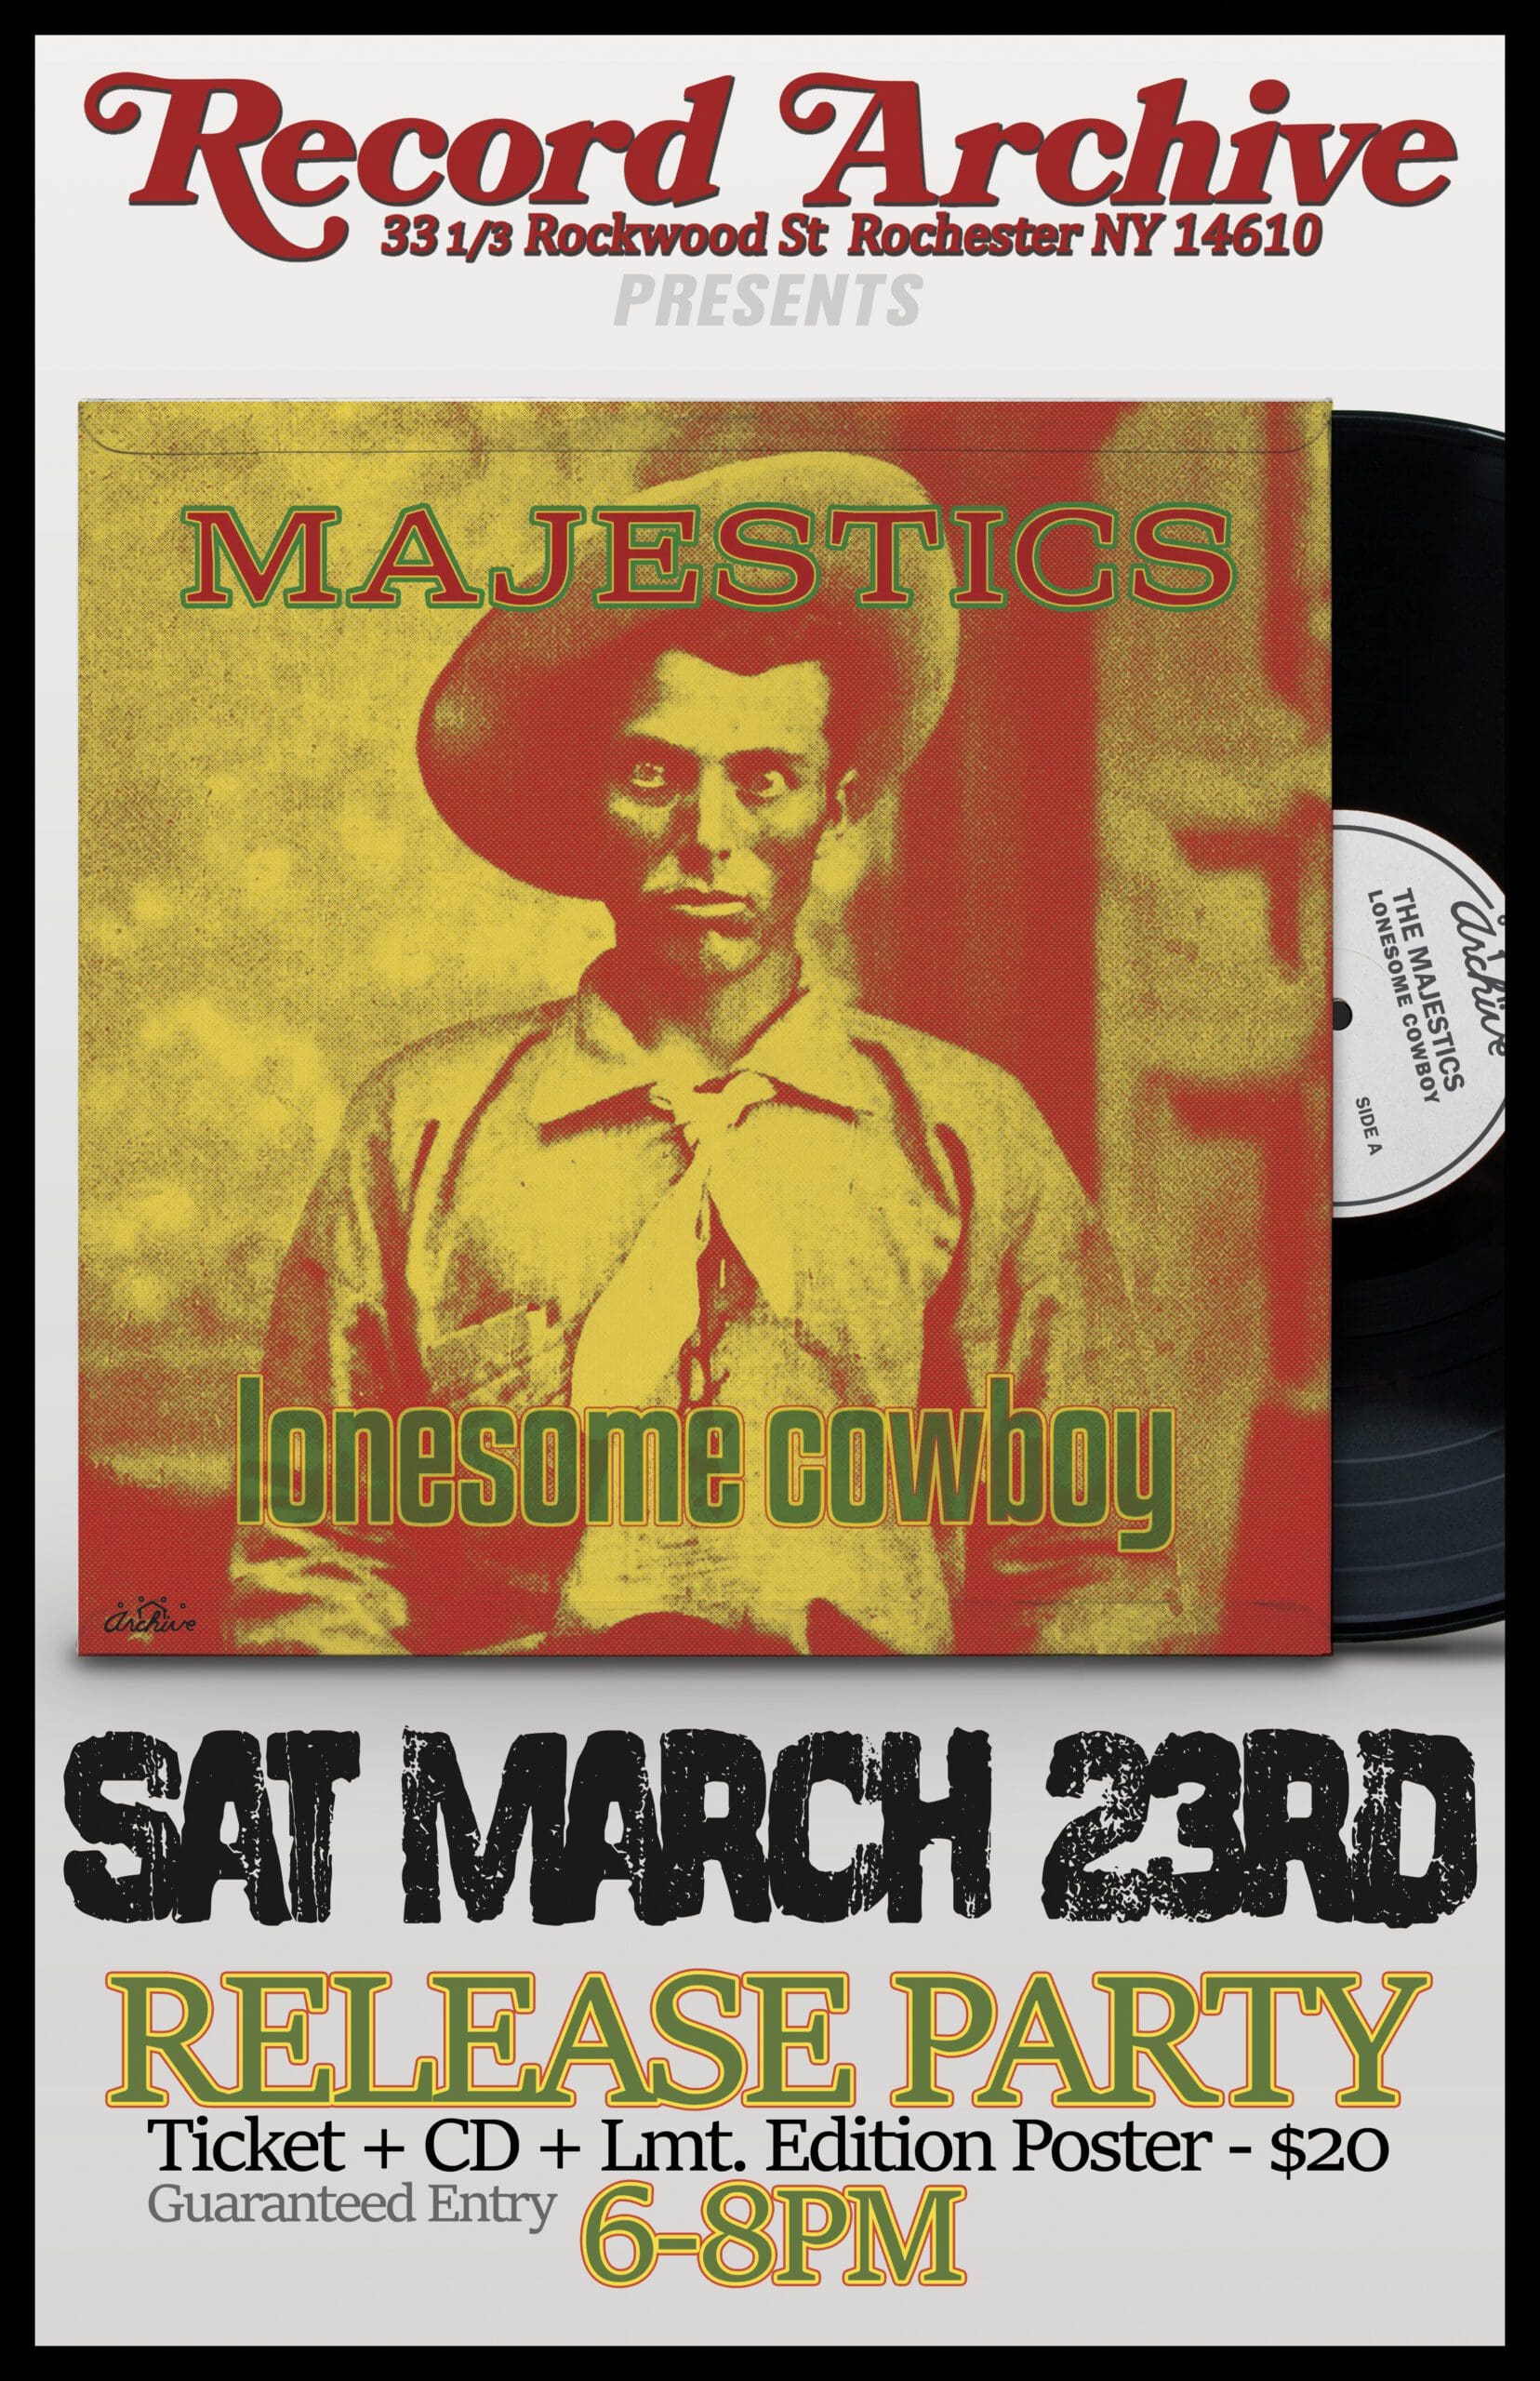 Record Archive 33 1/3 Rockwood St Rochester NY 14610 presents MAJESTICS LONESOME COWBOY. Sat MARCH 23RD. Release Party. TIcket (Guaranteed Entry) + CD + Limited Edition Poster. 6-8pm